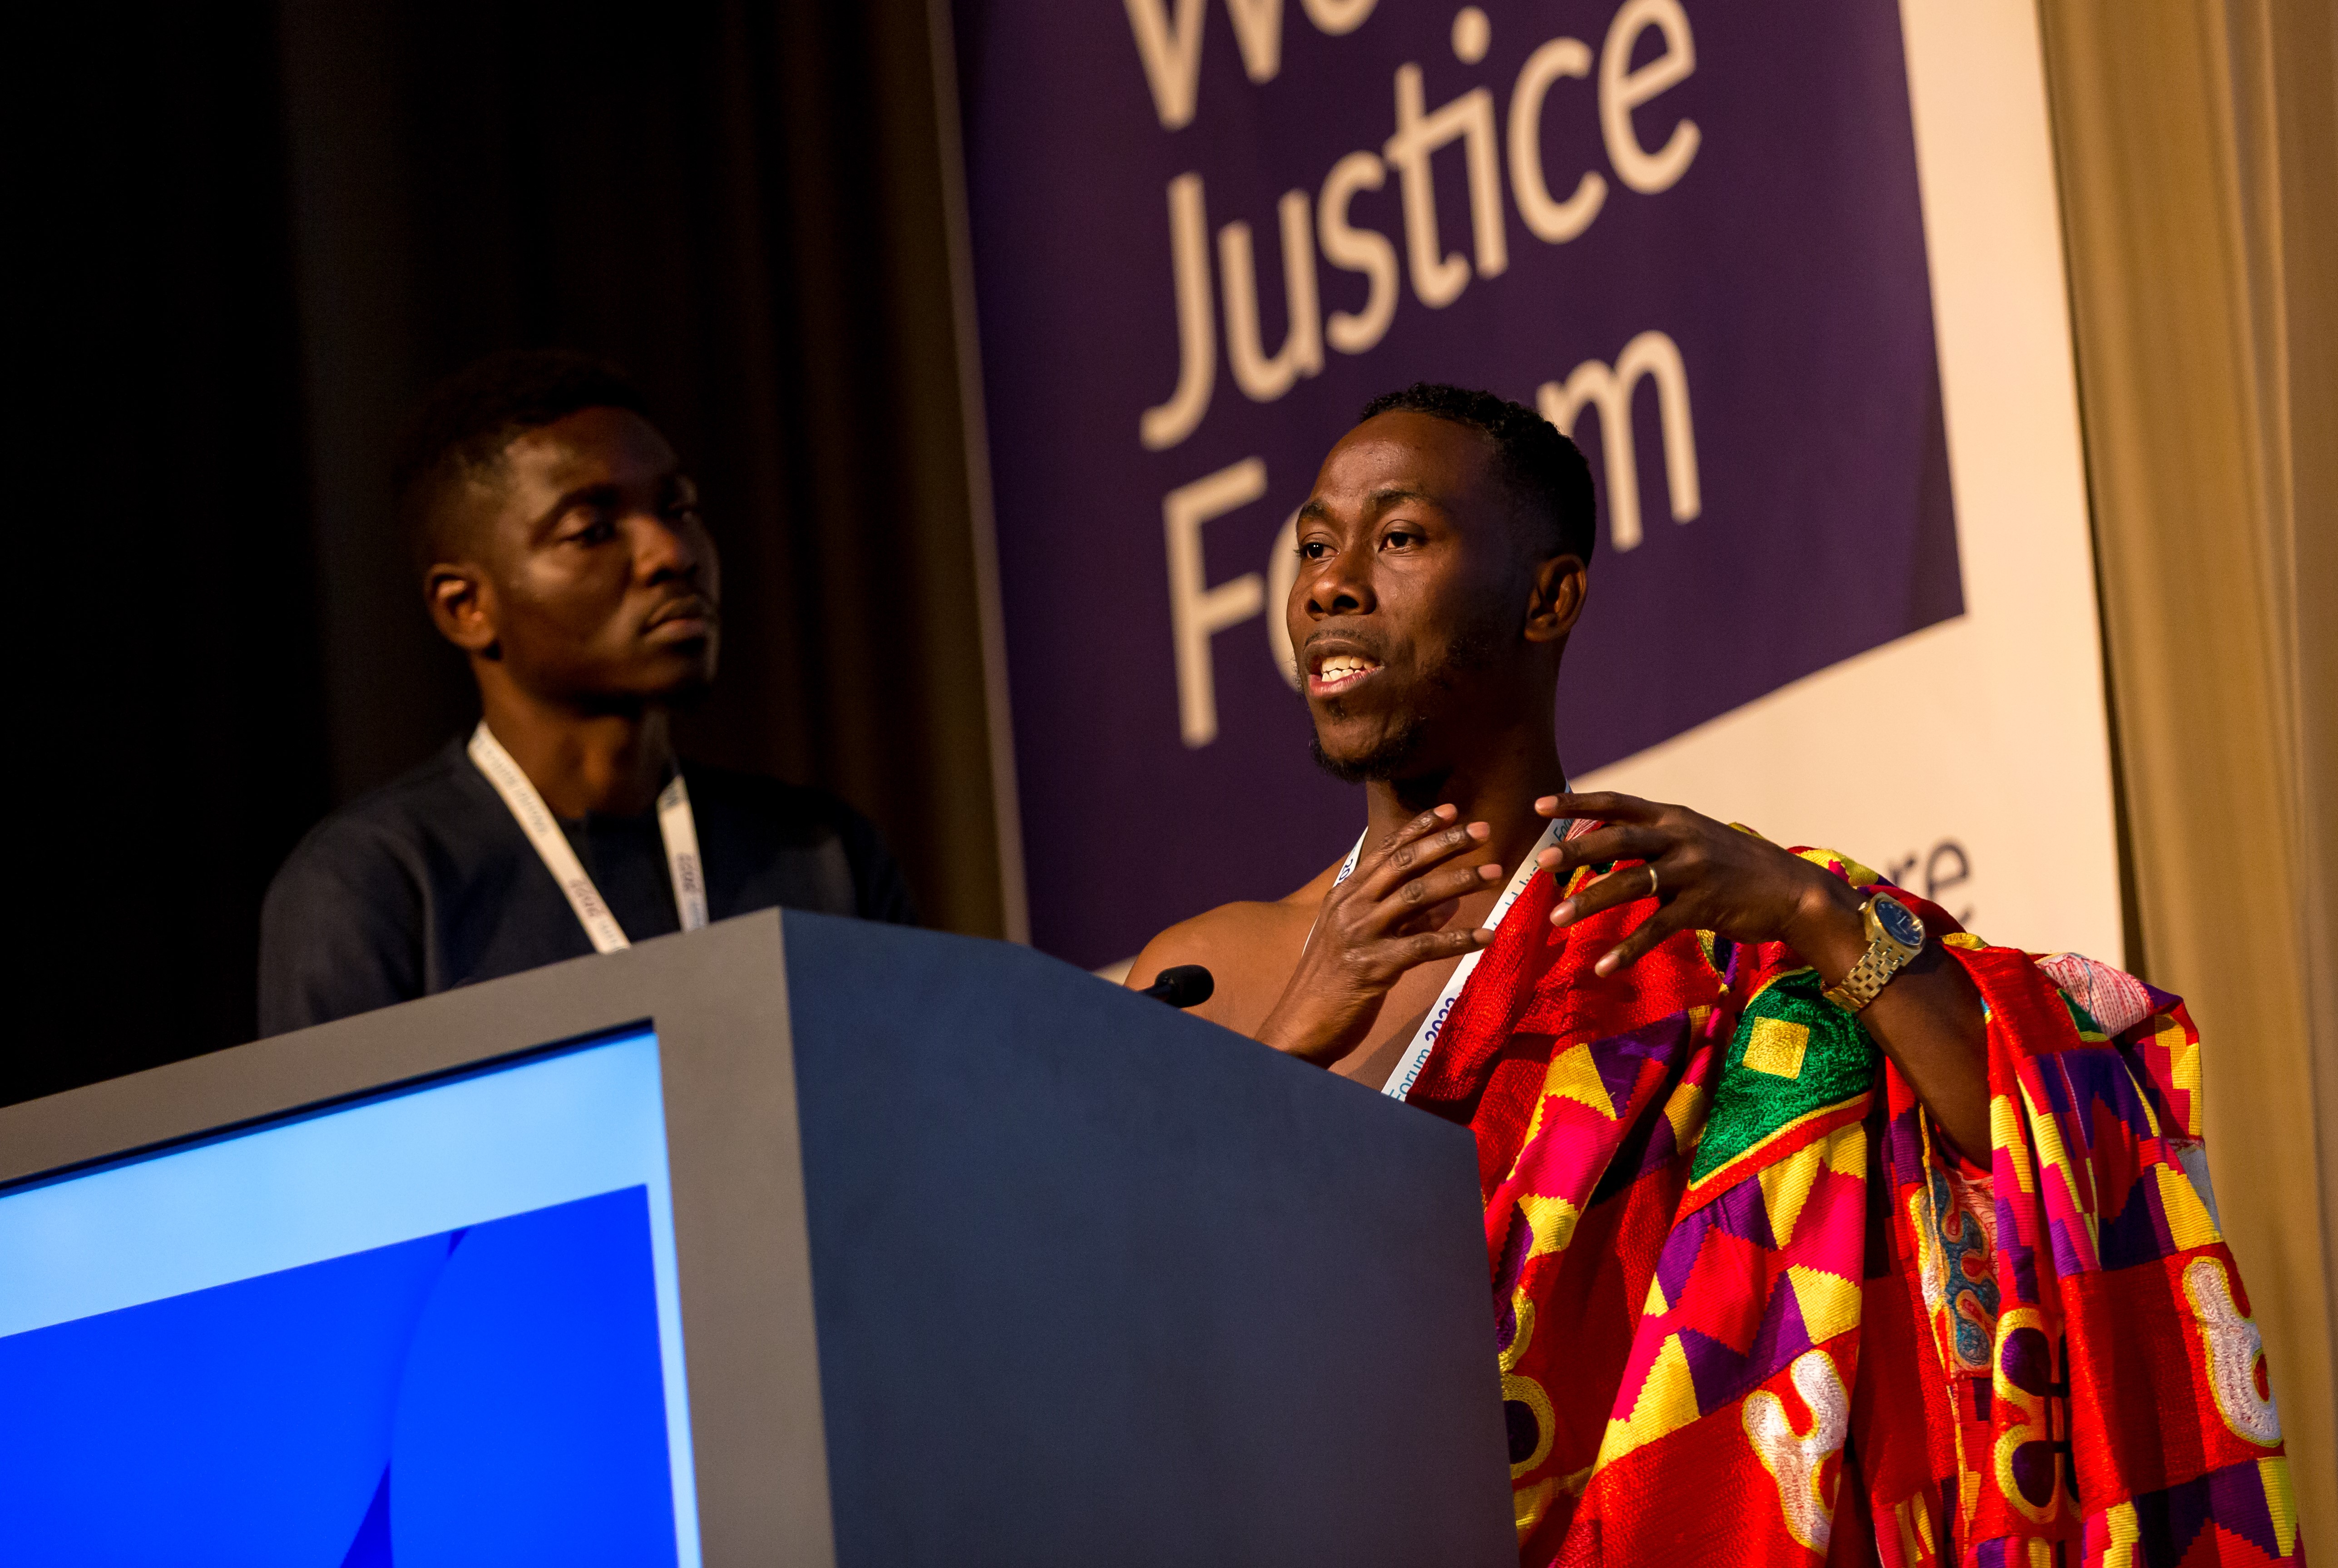  Jonathan Osei Owusu, the founder and executive director of the POS Foundation, presents during the 2022 World Justice Challenge showcase